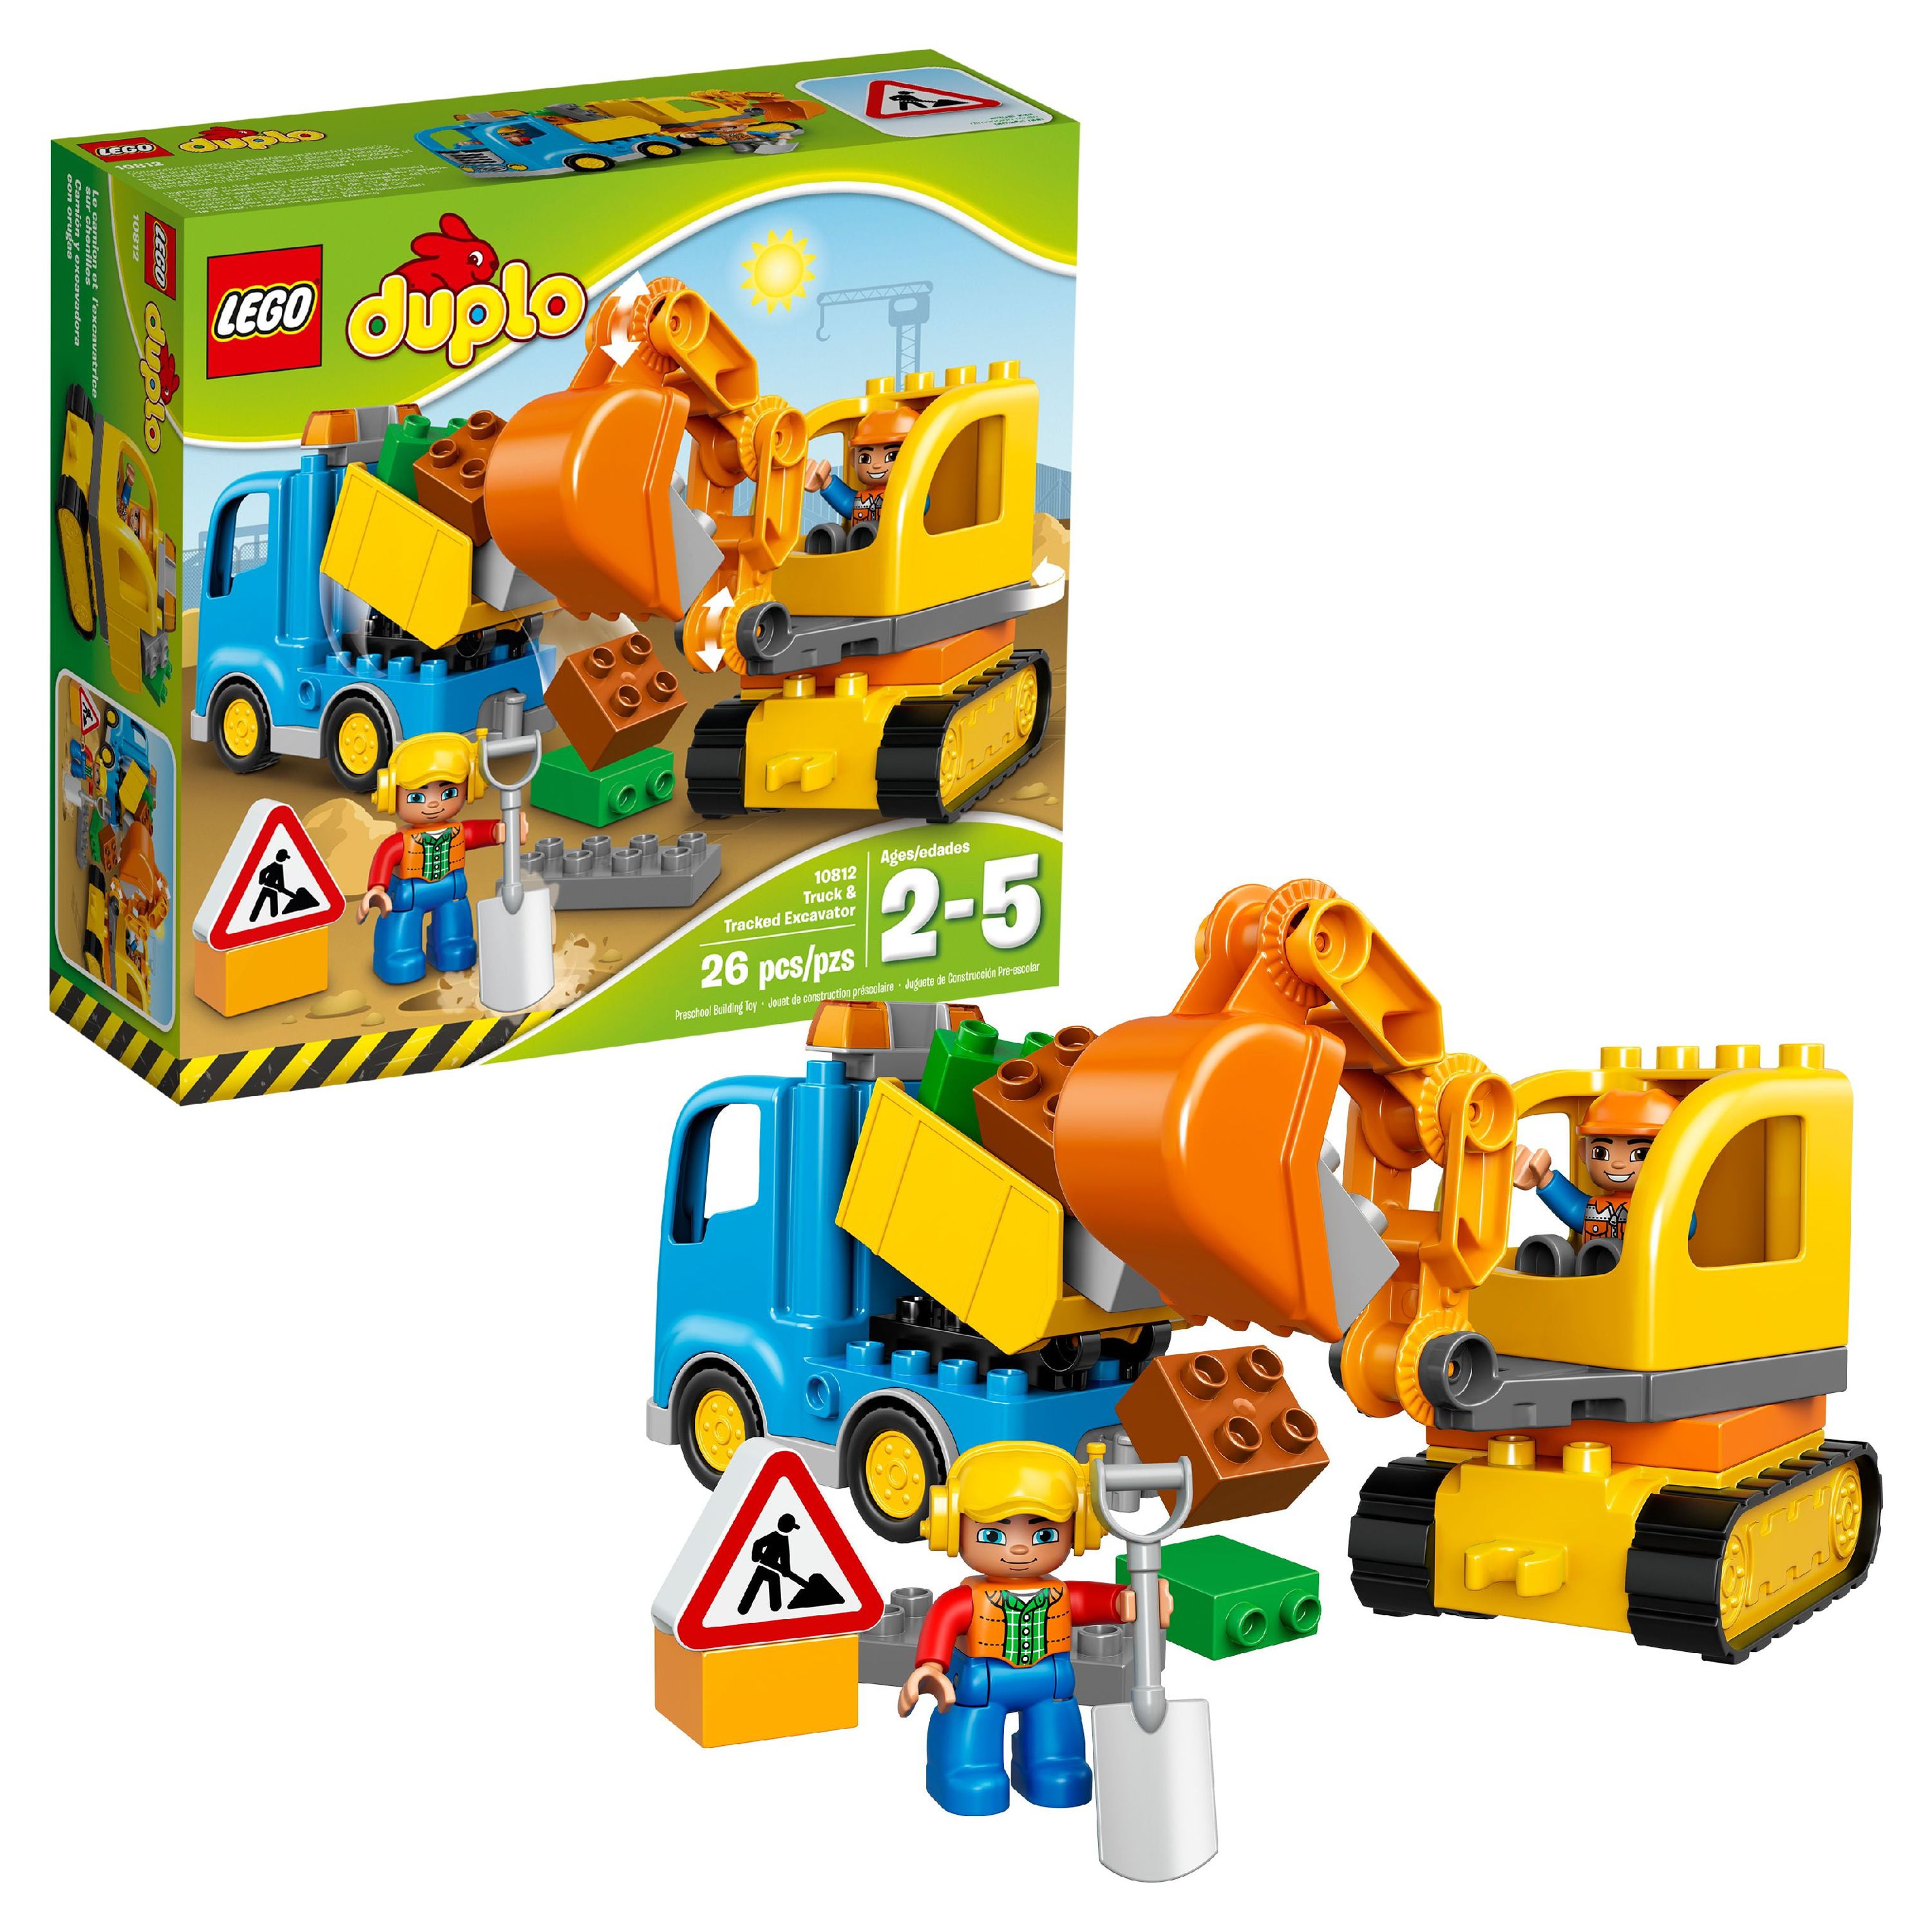 LEGO DUPLO Town Truck & Tracked Excavator 10812 (26 Pieces) - image 1 of 8